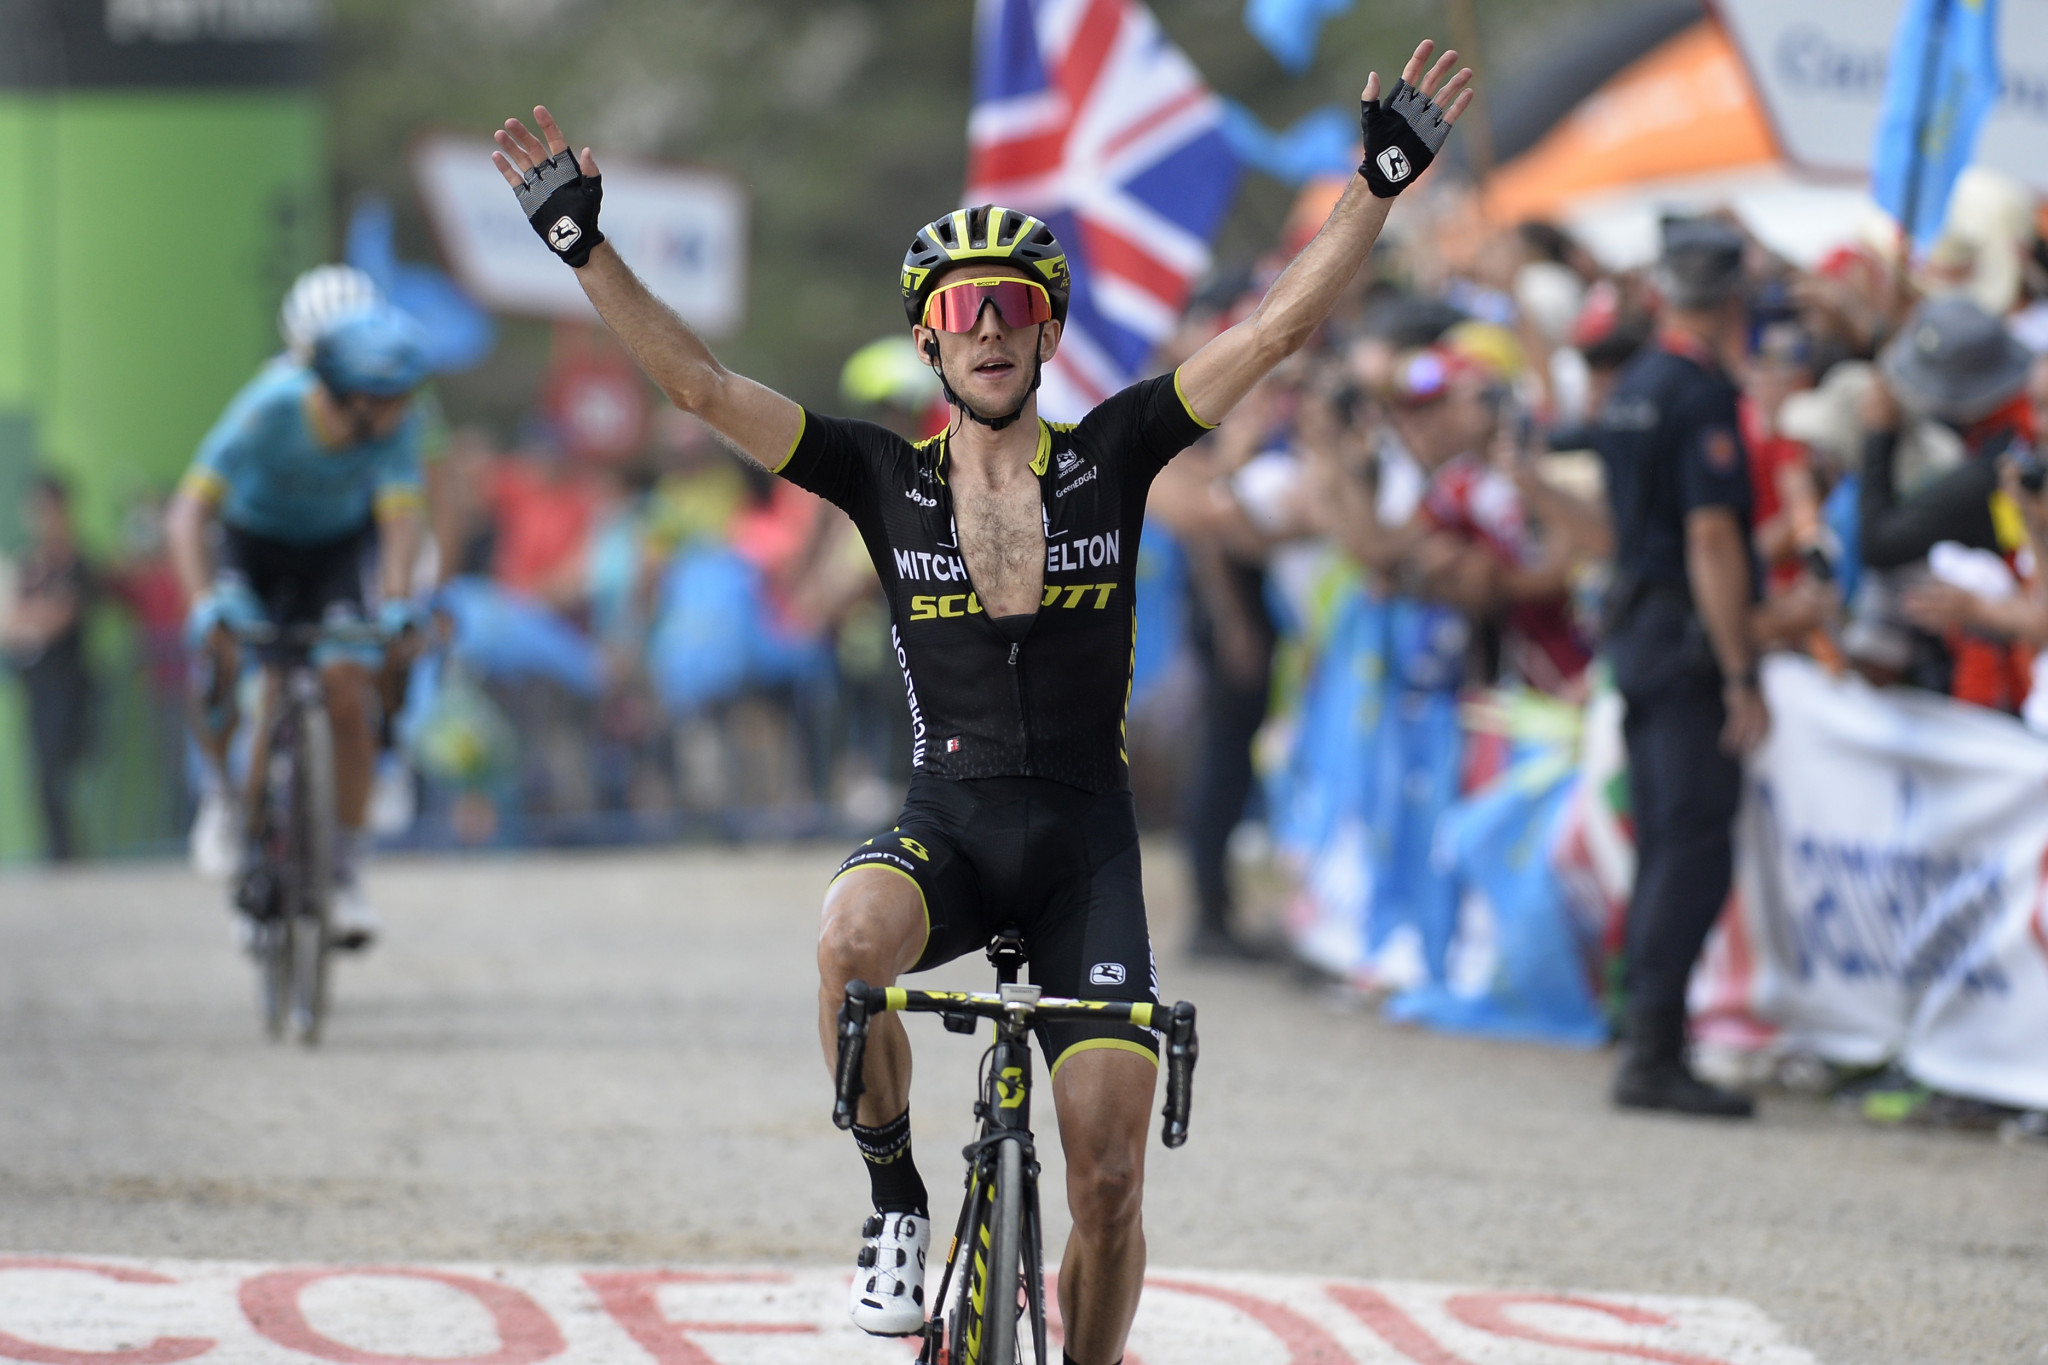 Yates assumes Vuelta a España race lead by winning stage 14